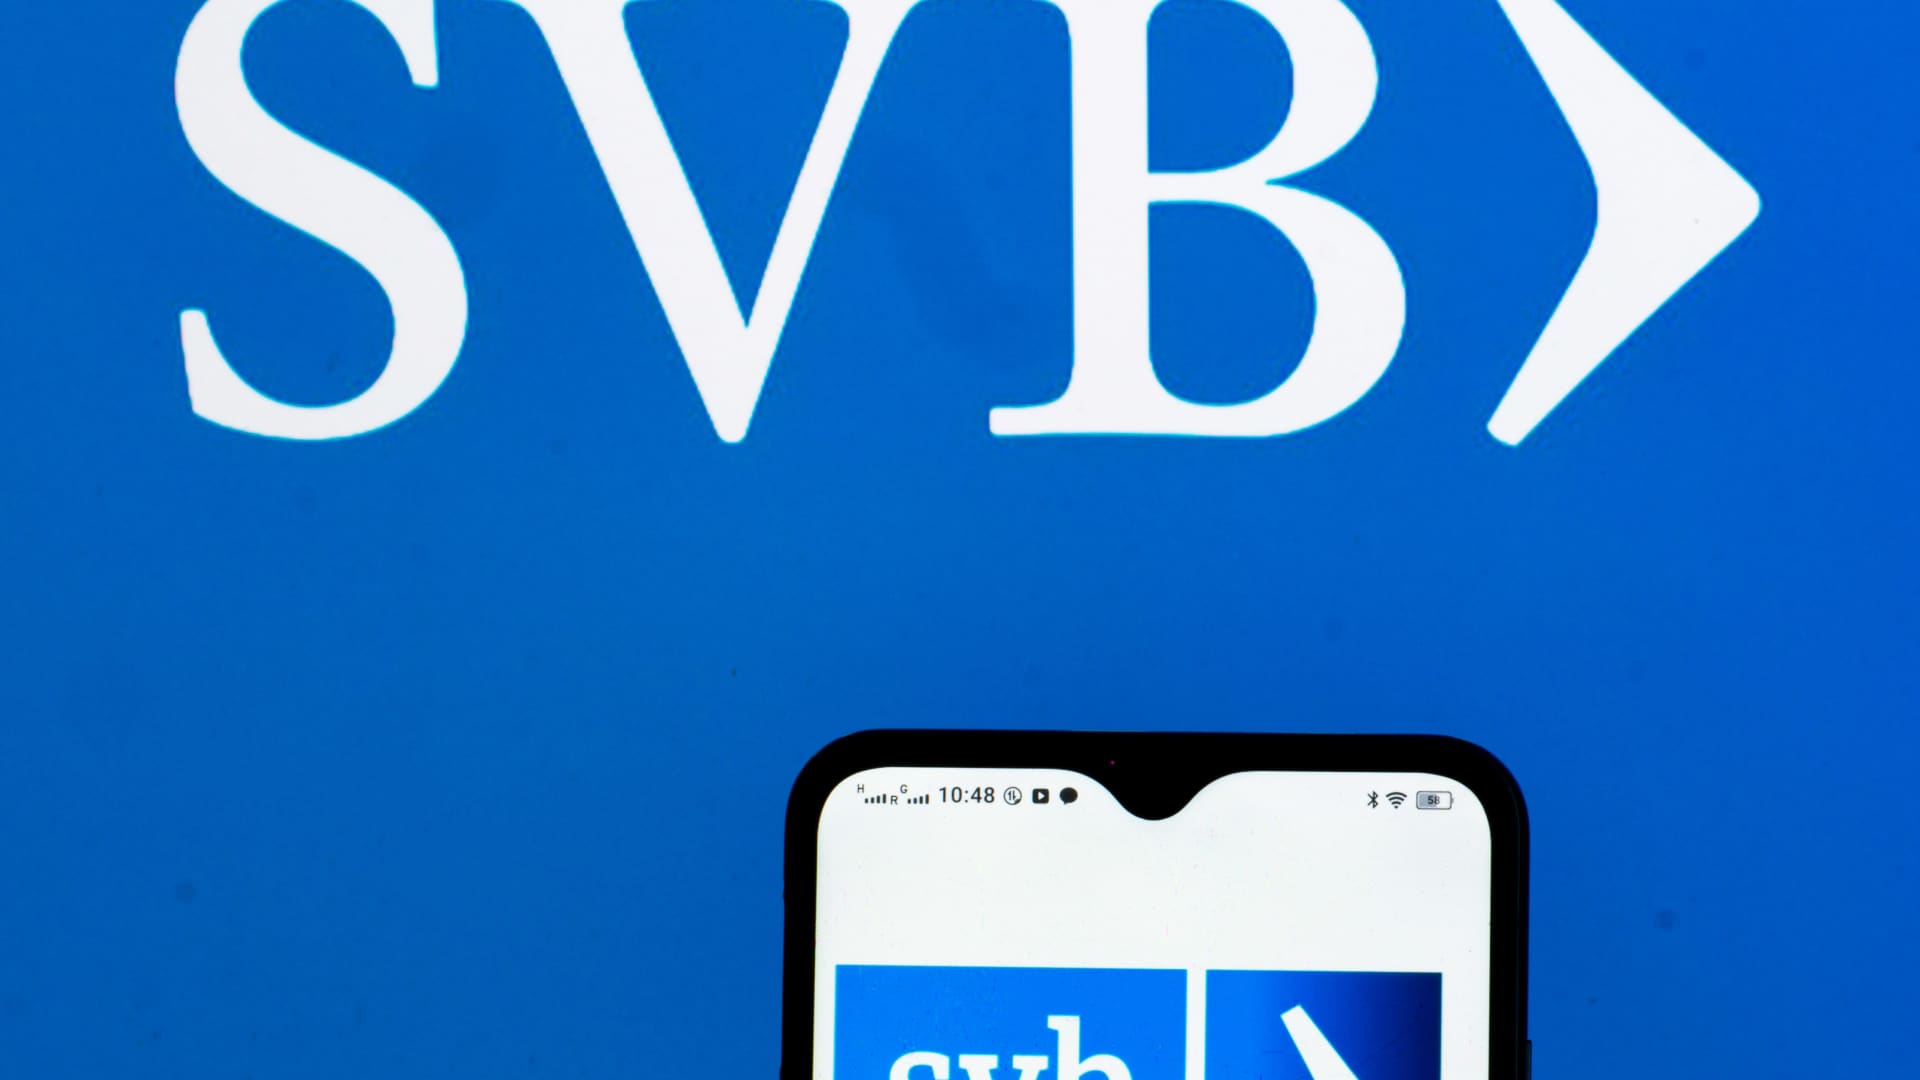 Shares of SVB Financial fall more than 50% as tech-focused bank looks to raise more cash